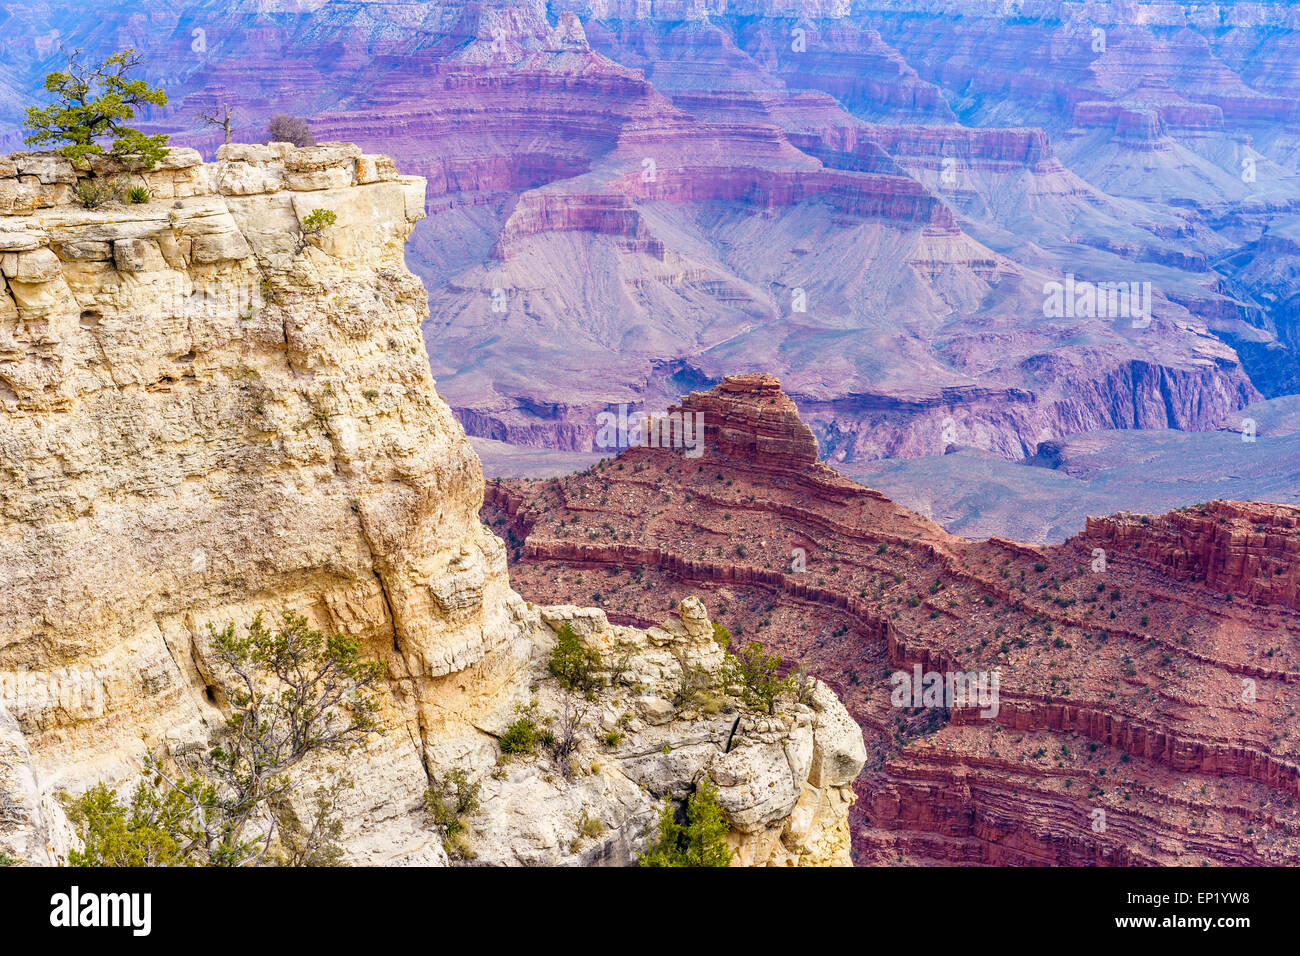 View of Grand Canyon from the South Rim, Arizona, USA Stock Photo